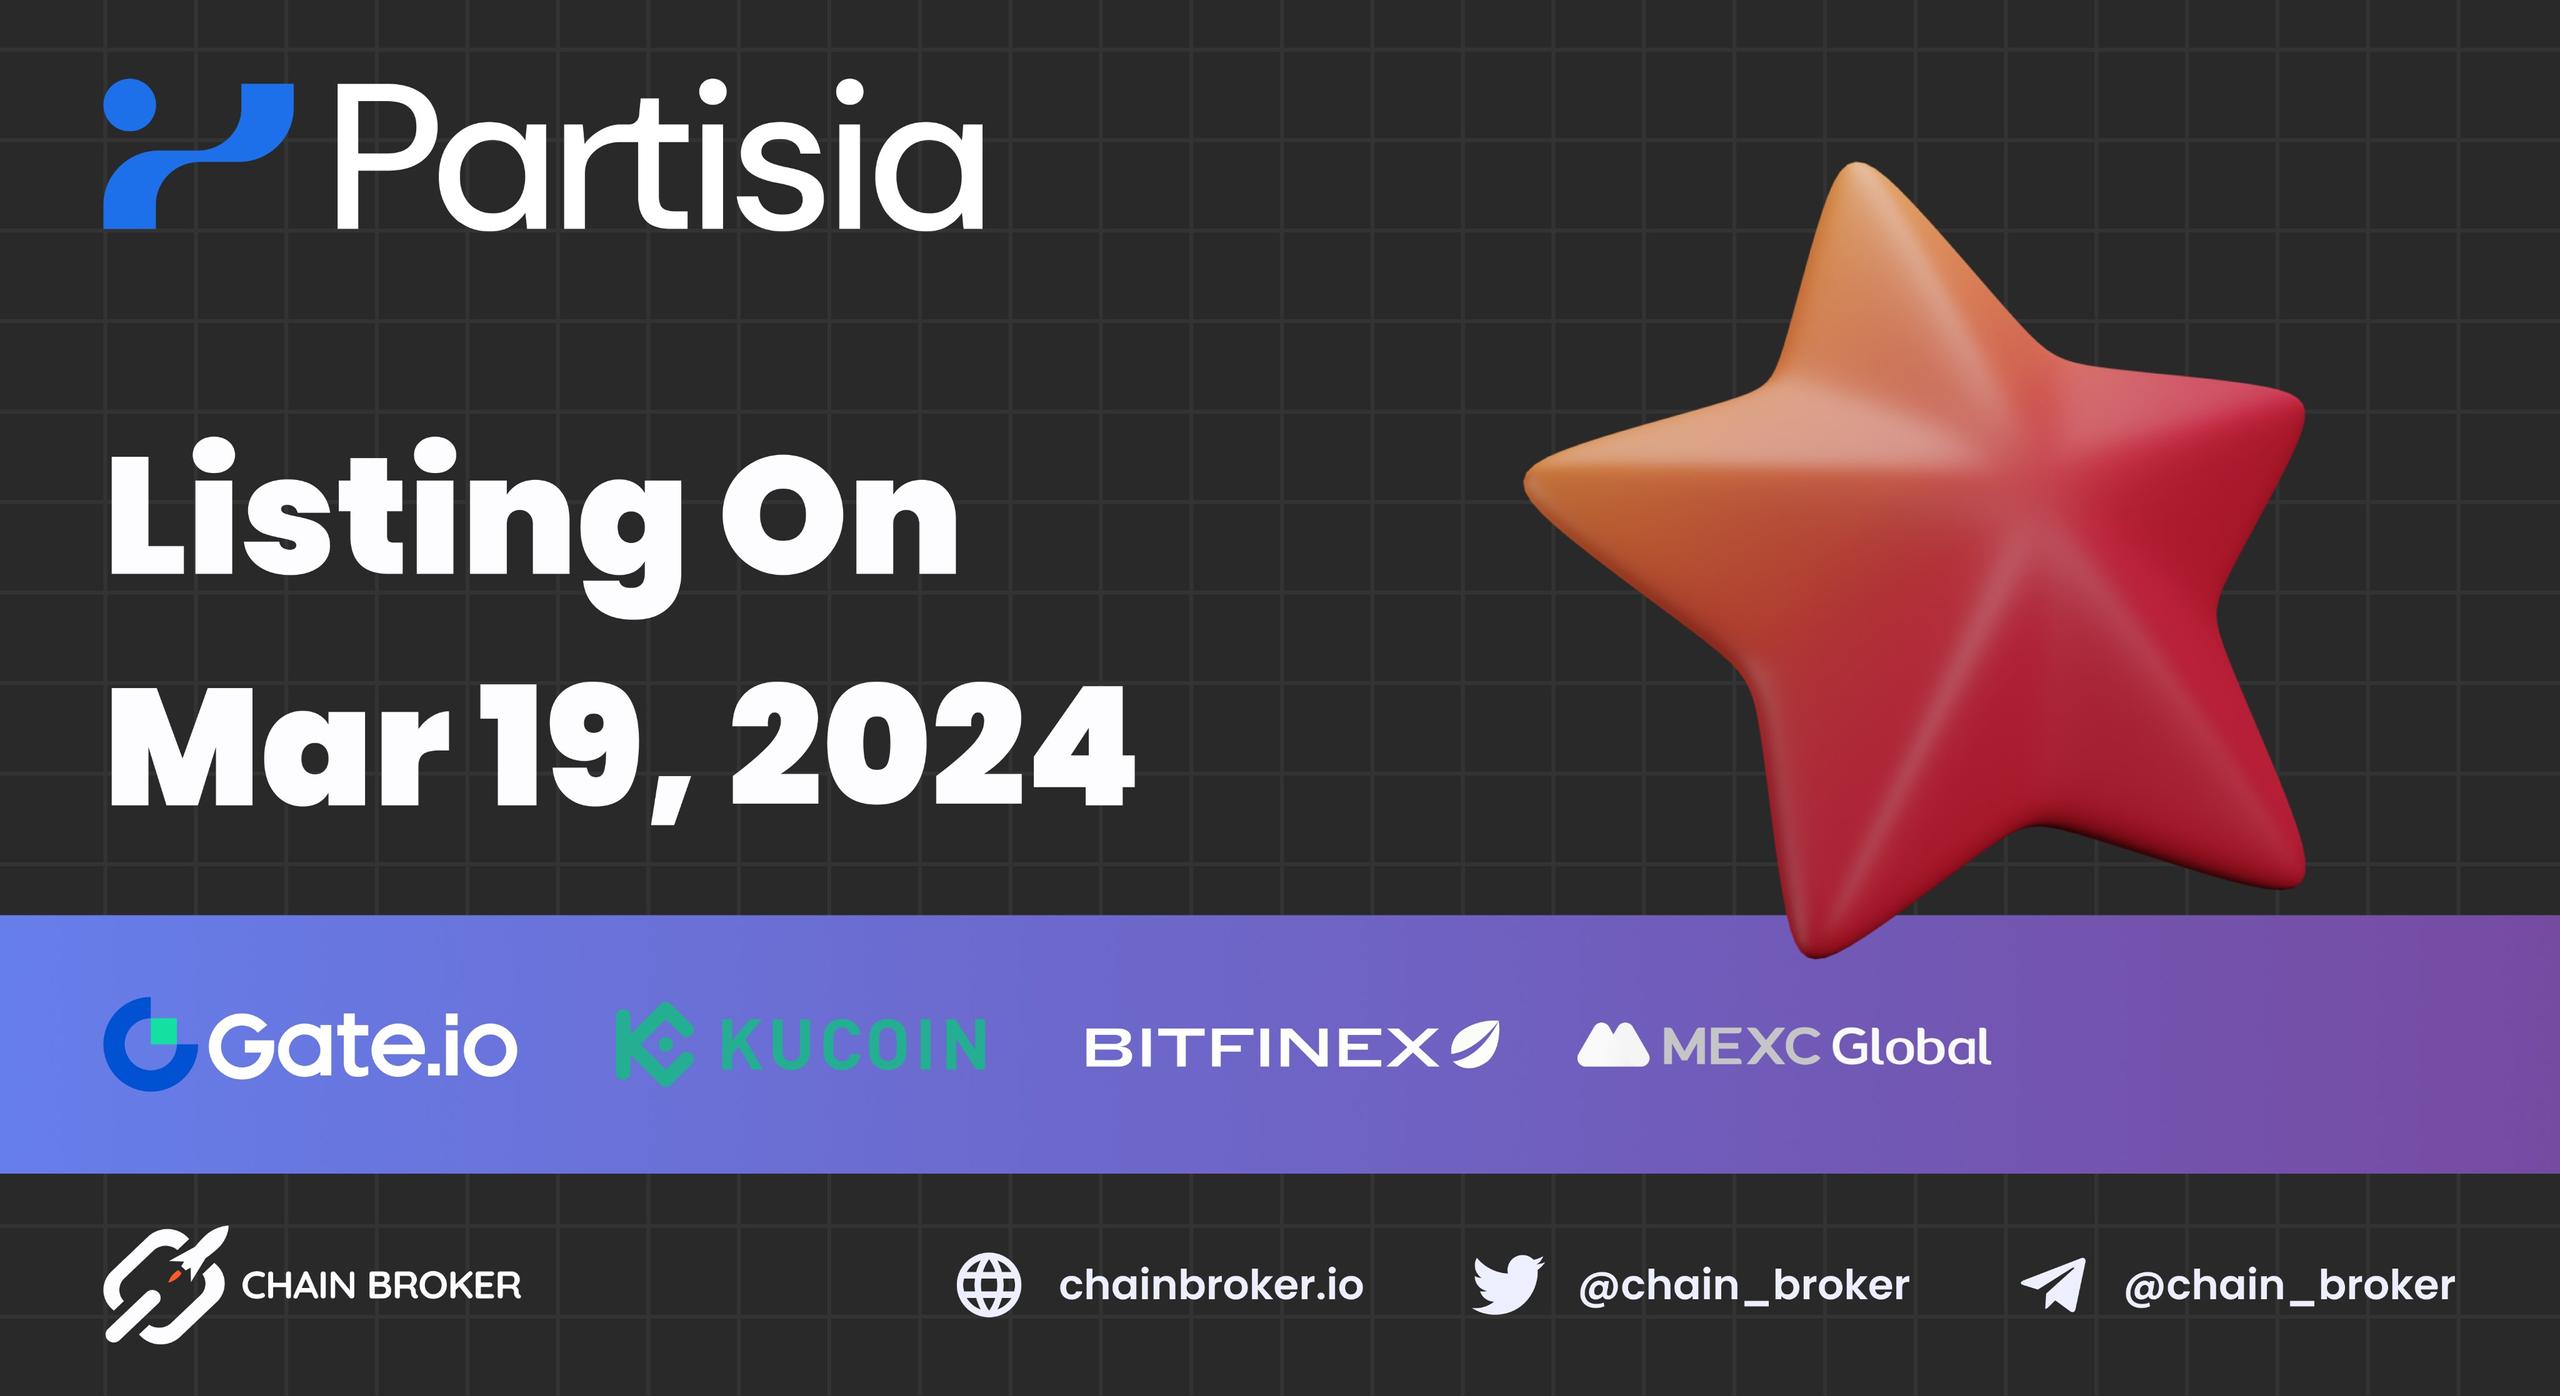 Partisia Blockchain Initial Listing will take place Tomorrow